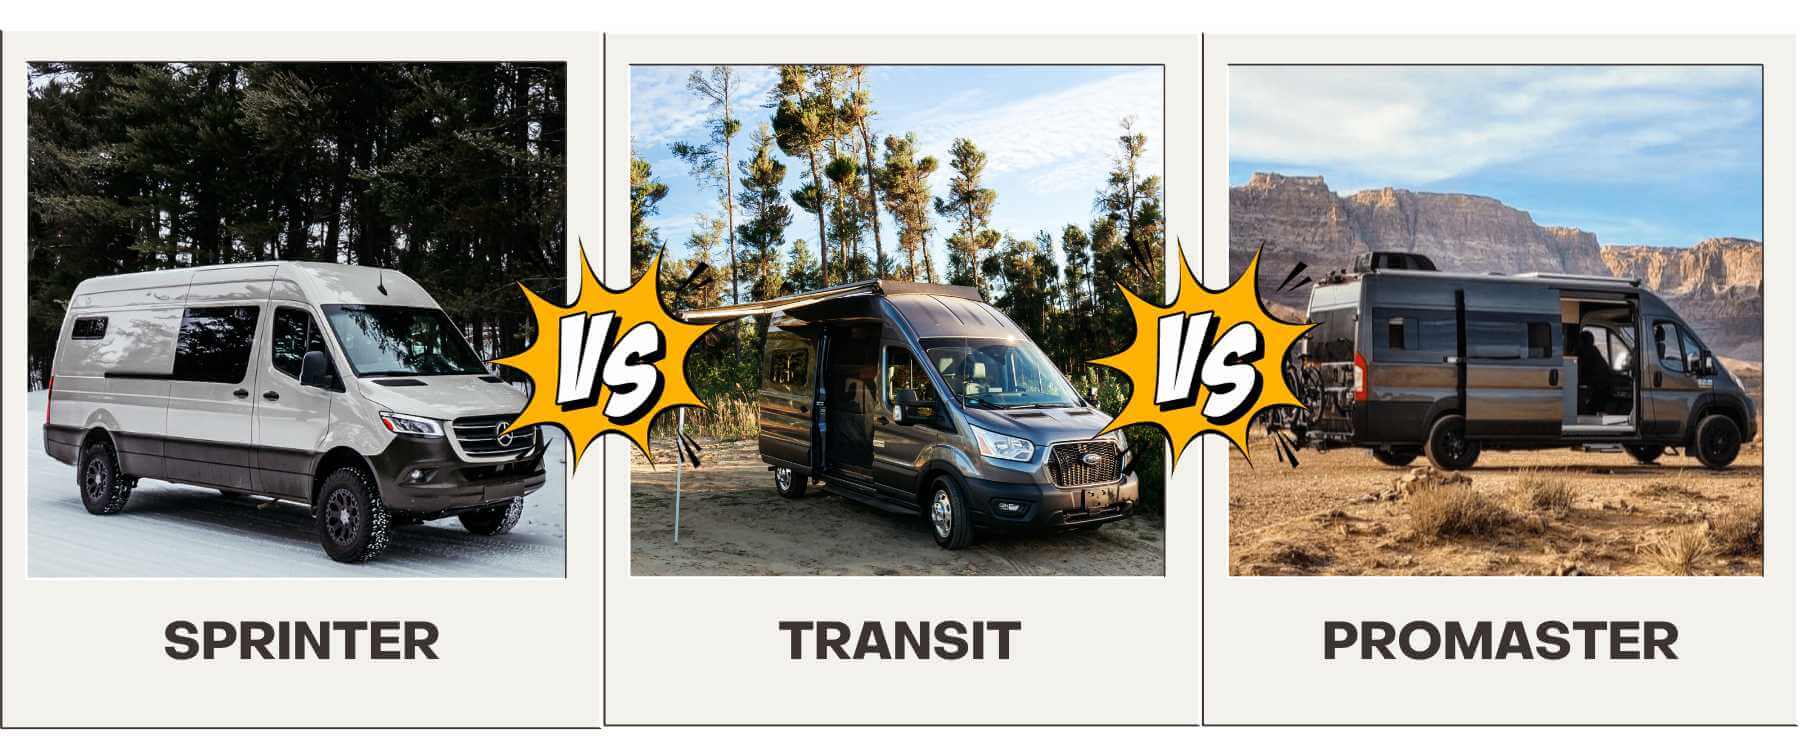 2023 Ford Transit Trail Is Off-Road, Off-Grid Vehicle For Van Life